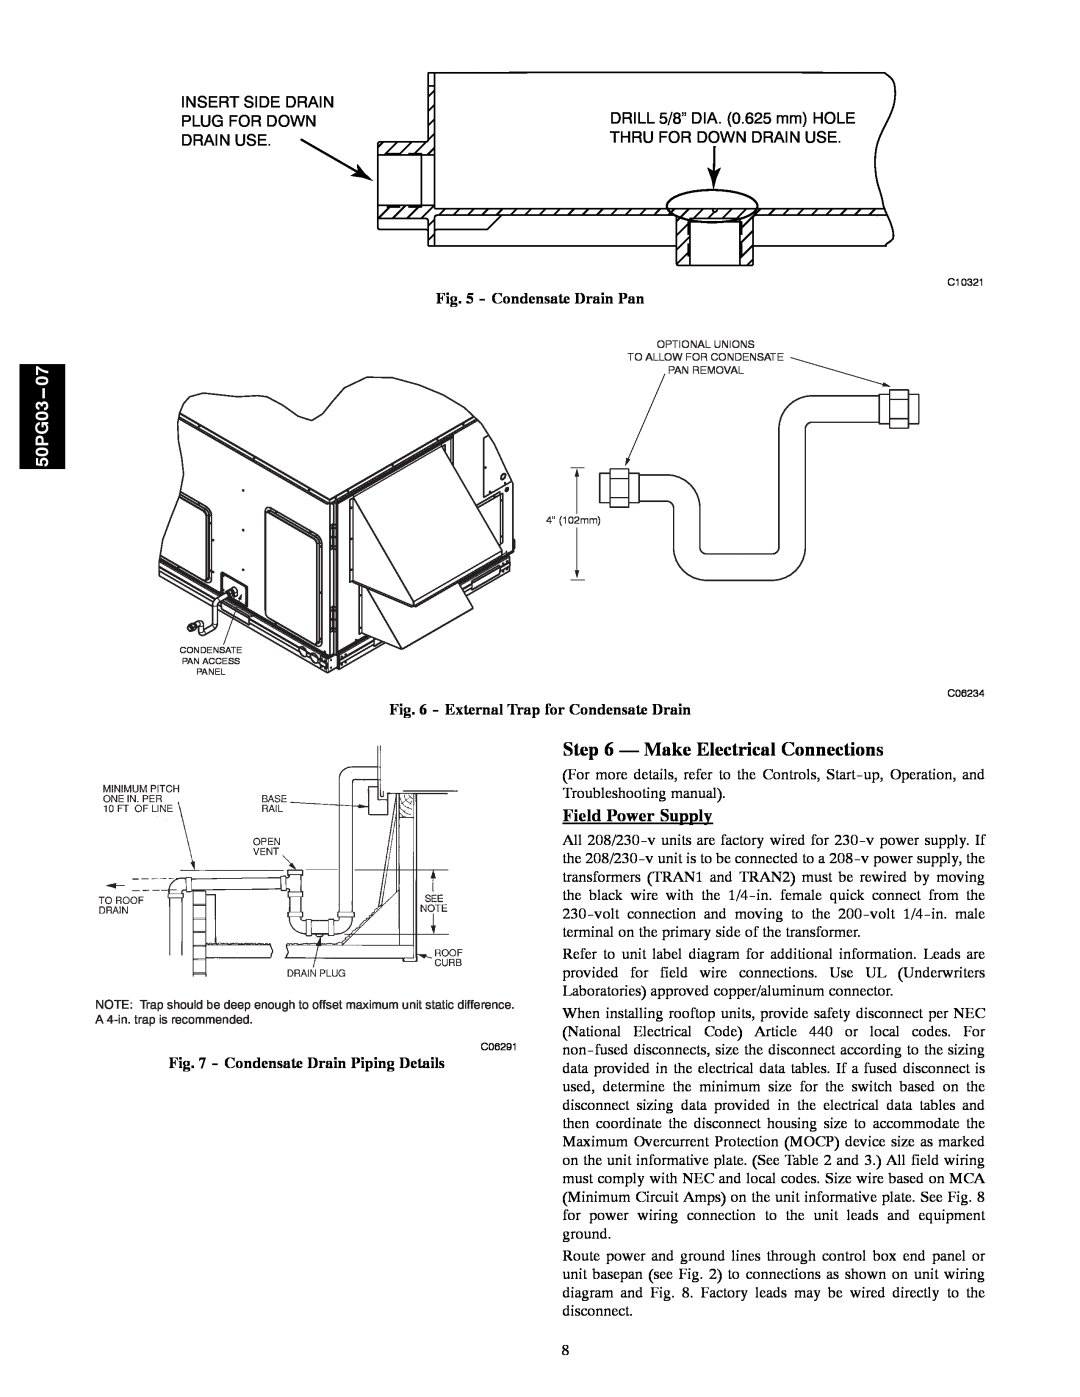 Carrier 50PG03-07 Make Electrical Connections, Field Power Supply, Condensate Drain Pan, Condensate Drain Piping Details 